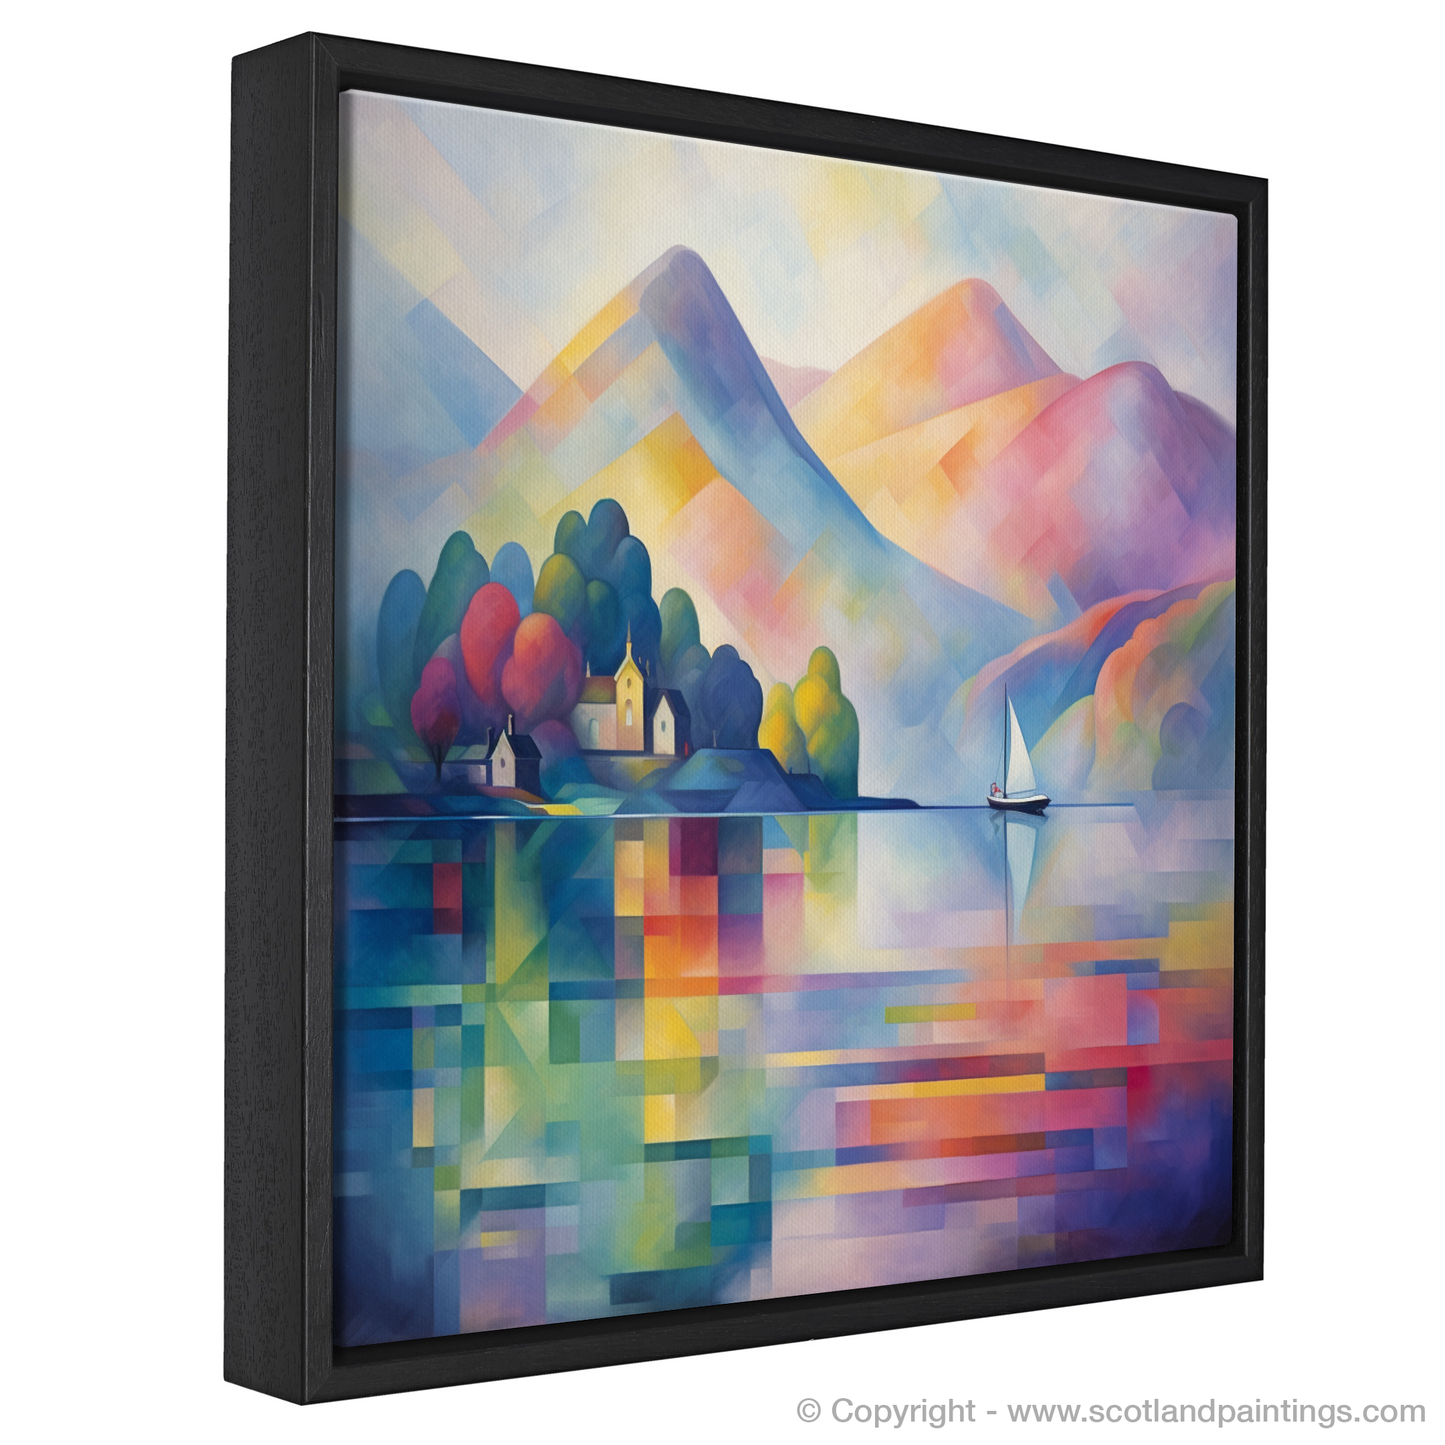 Painting and Art Print of Misty morning on Loch Lomond entitled "Misty Morning Abstraction on Loch Lomond".